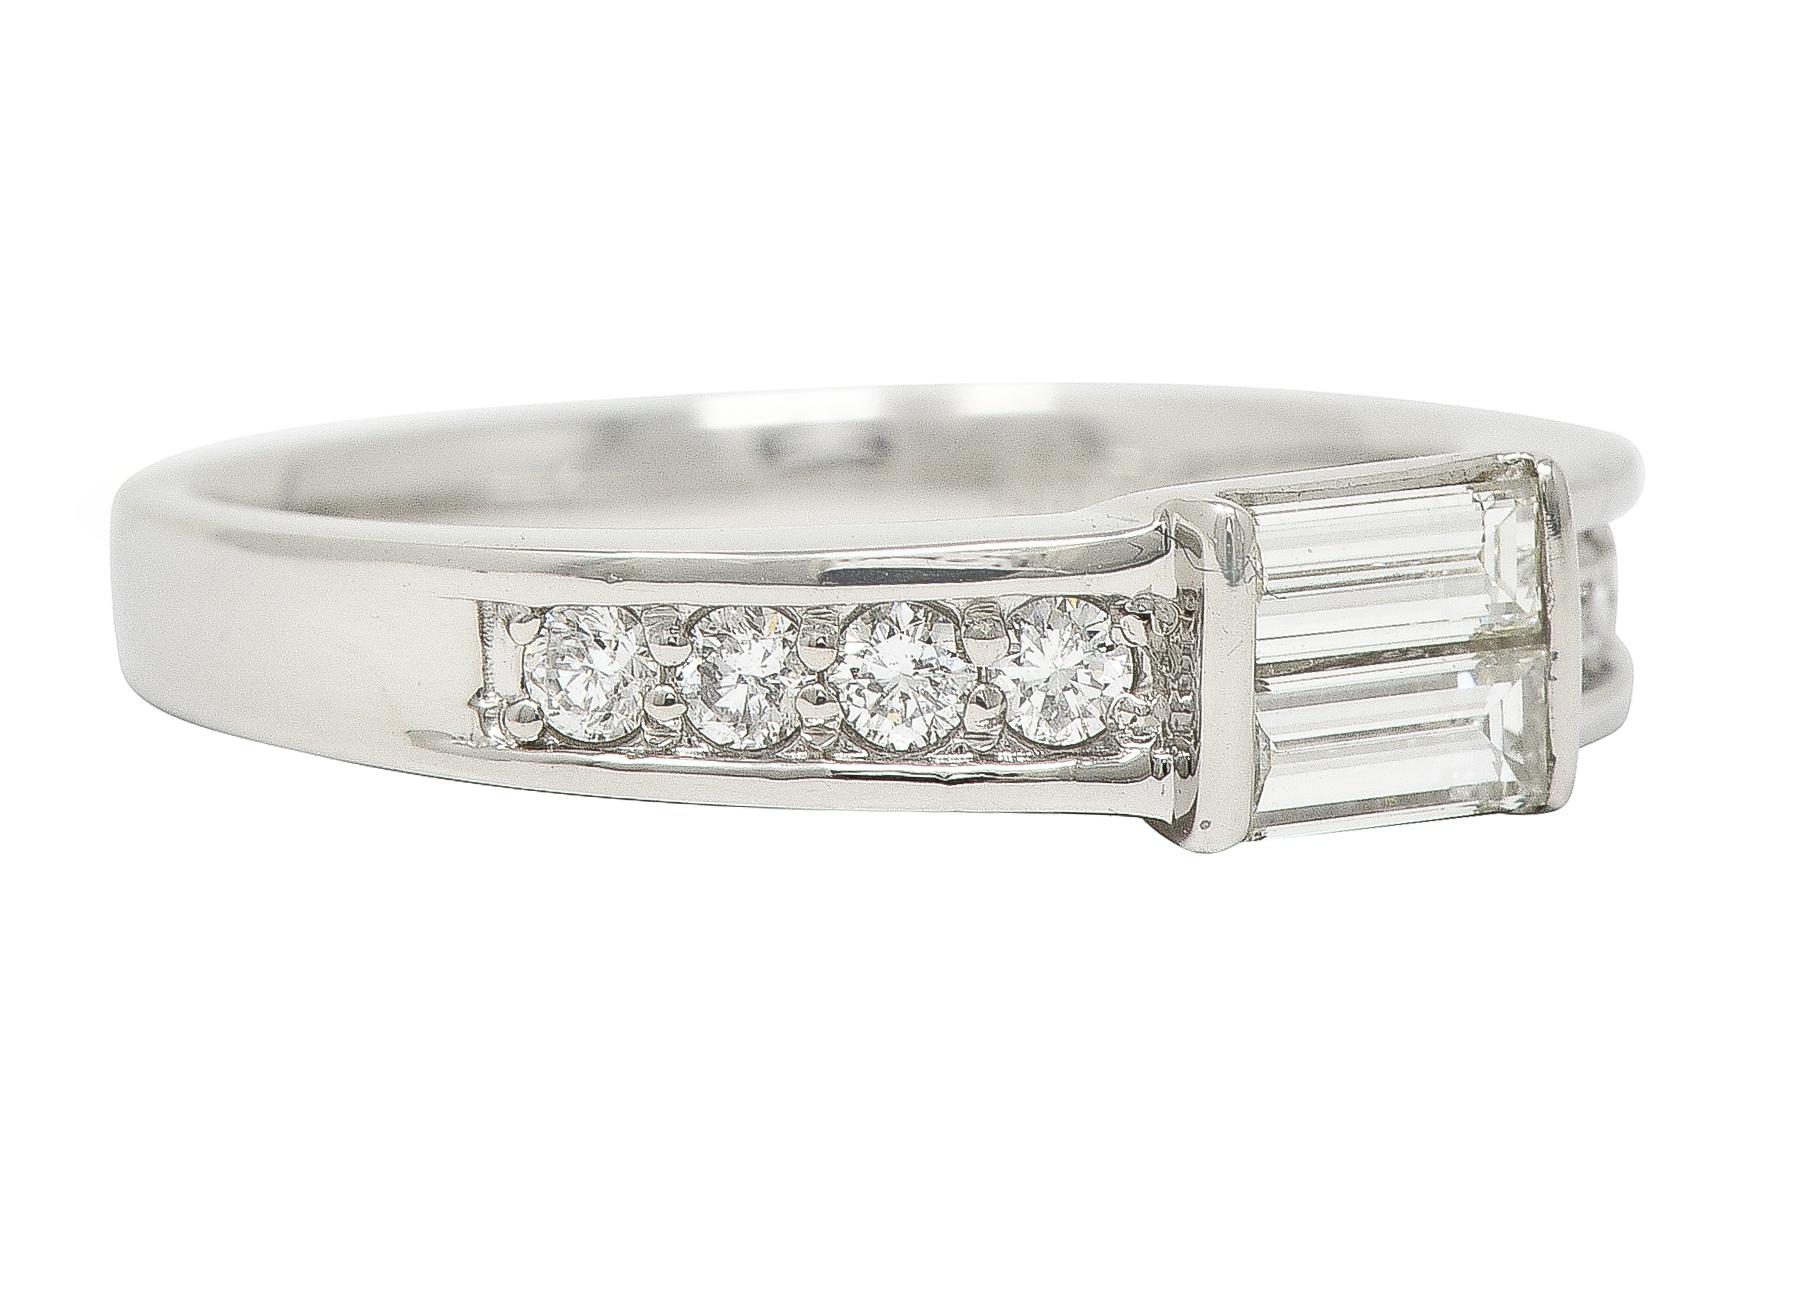 Centering two baguette cut diamonds bar set north to south and weighing 0.24 carat total
Flanked by graduated round brilliant cut diamonds bead set in shoulders 
Weighing approximately 0.32 carat total 
H color with VS1 clarity,